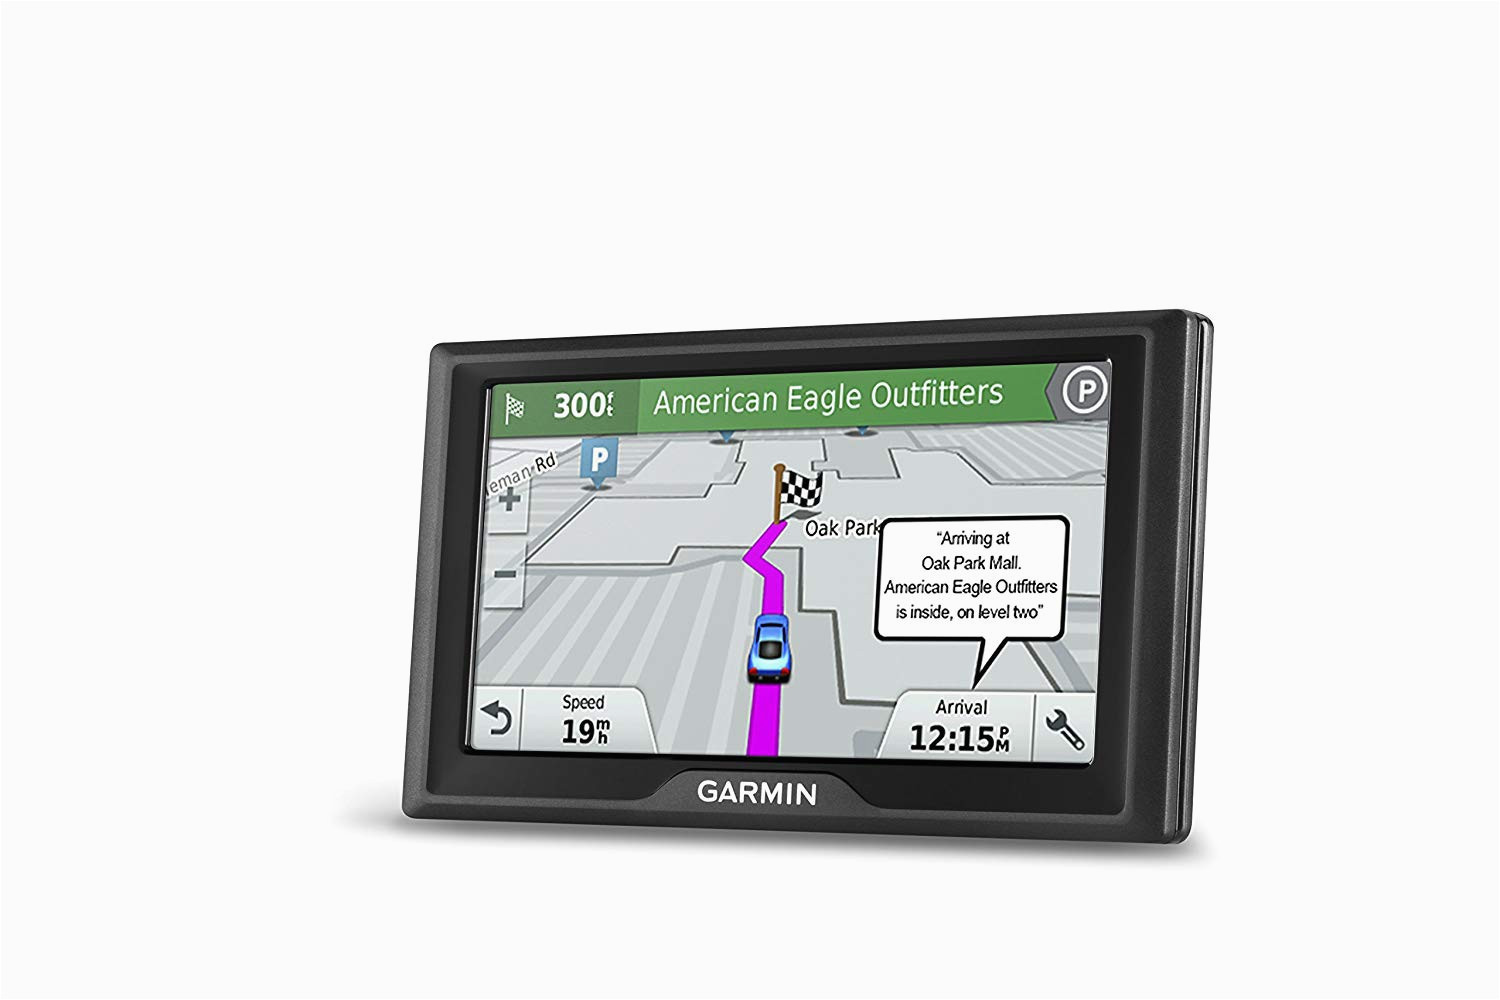 garmin drive 51 usa can lmt s gps navigator system with lifetime maps live traffic and live parking driver alerts direct access tripadvisor and